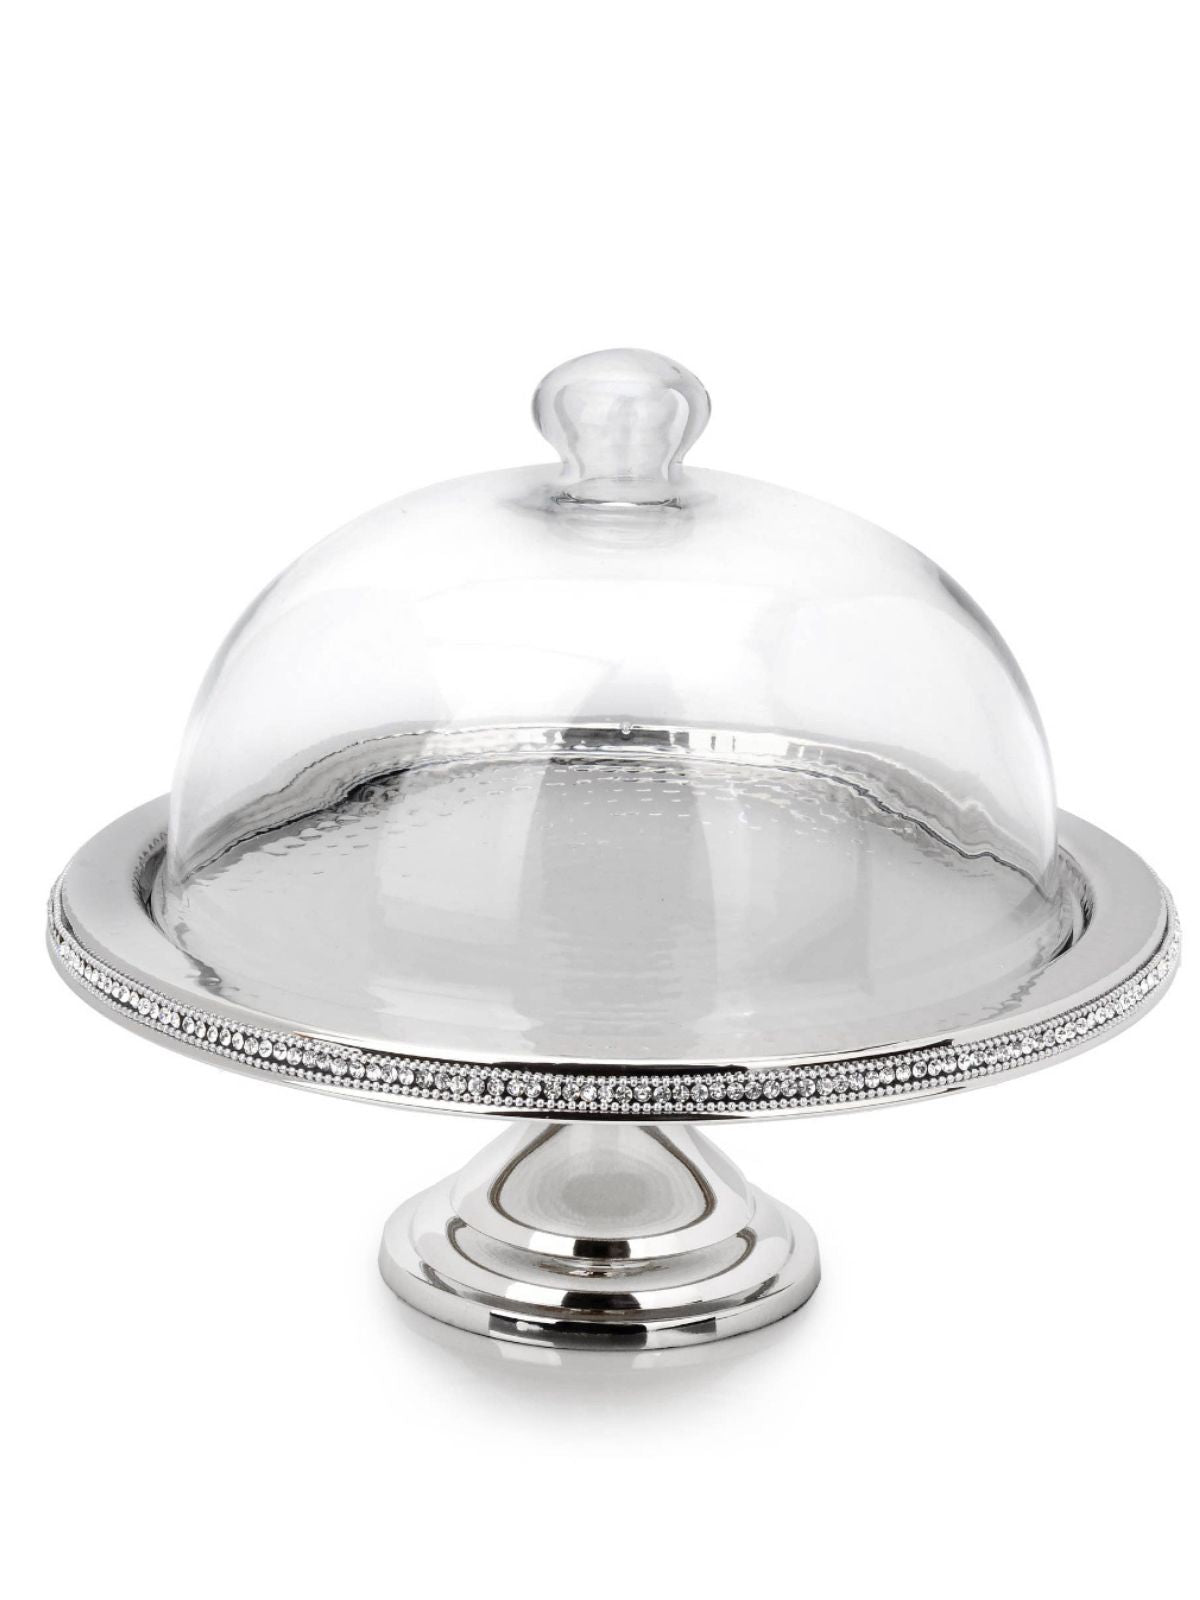 Stainless Steel Dome Cake Stand with Diamond Details Sold by KYA Home Decor.